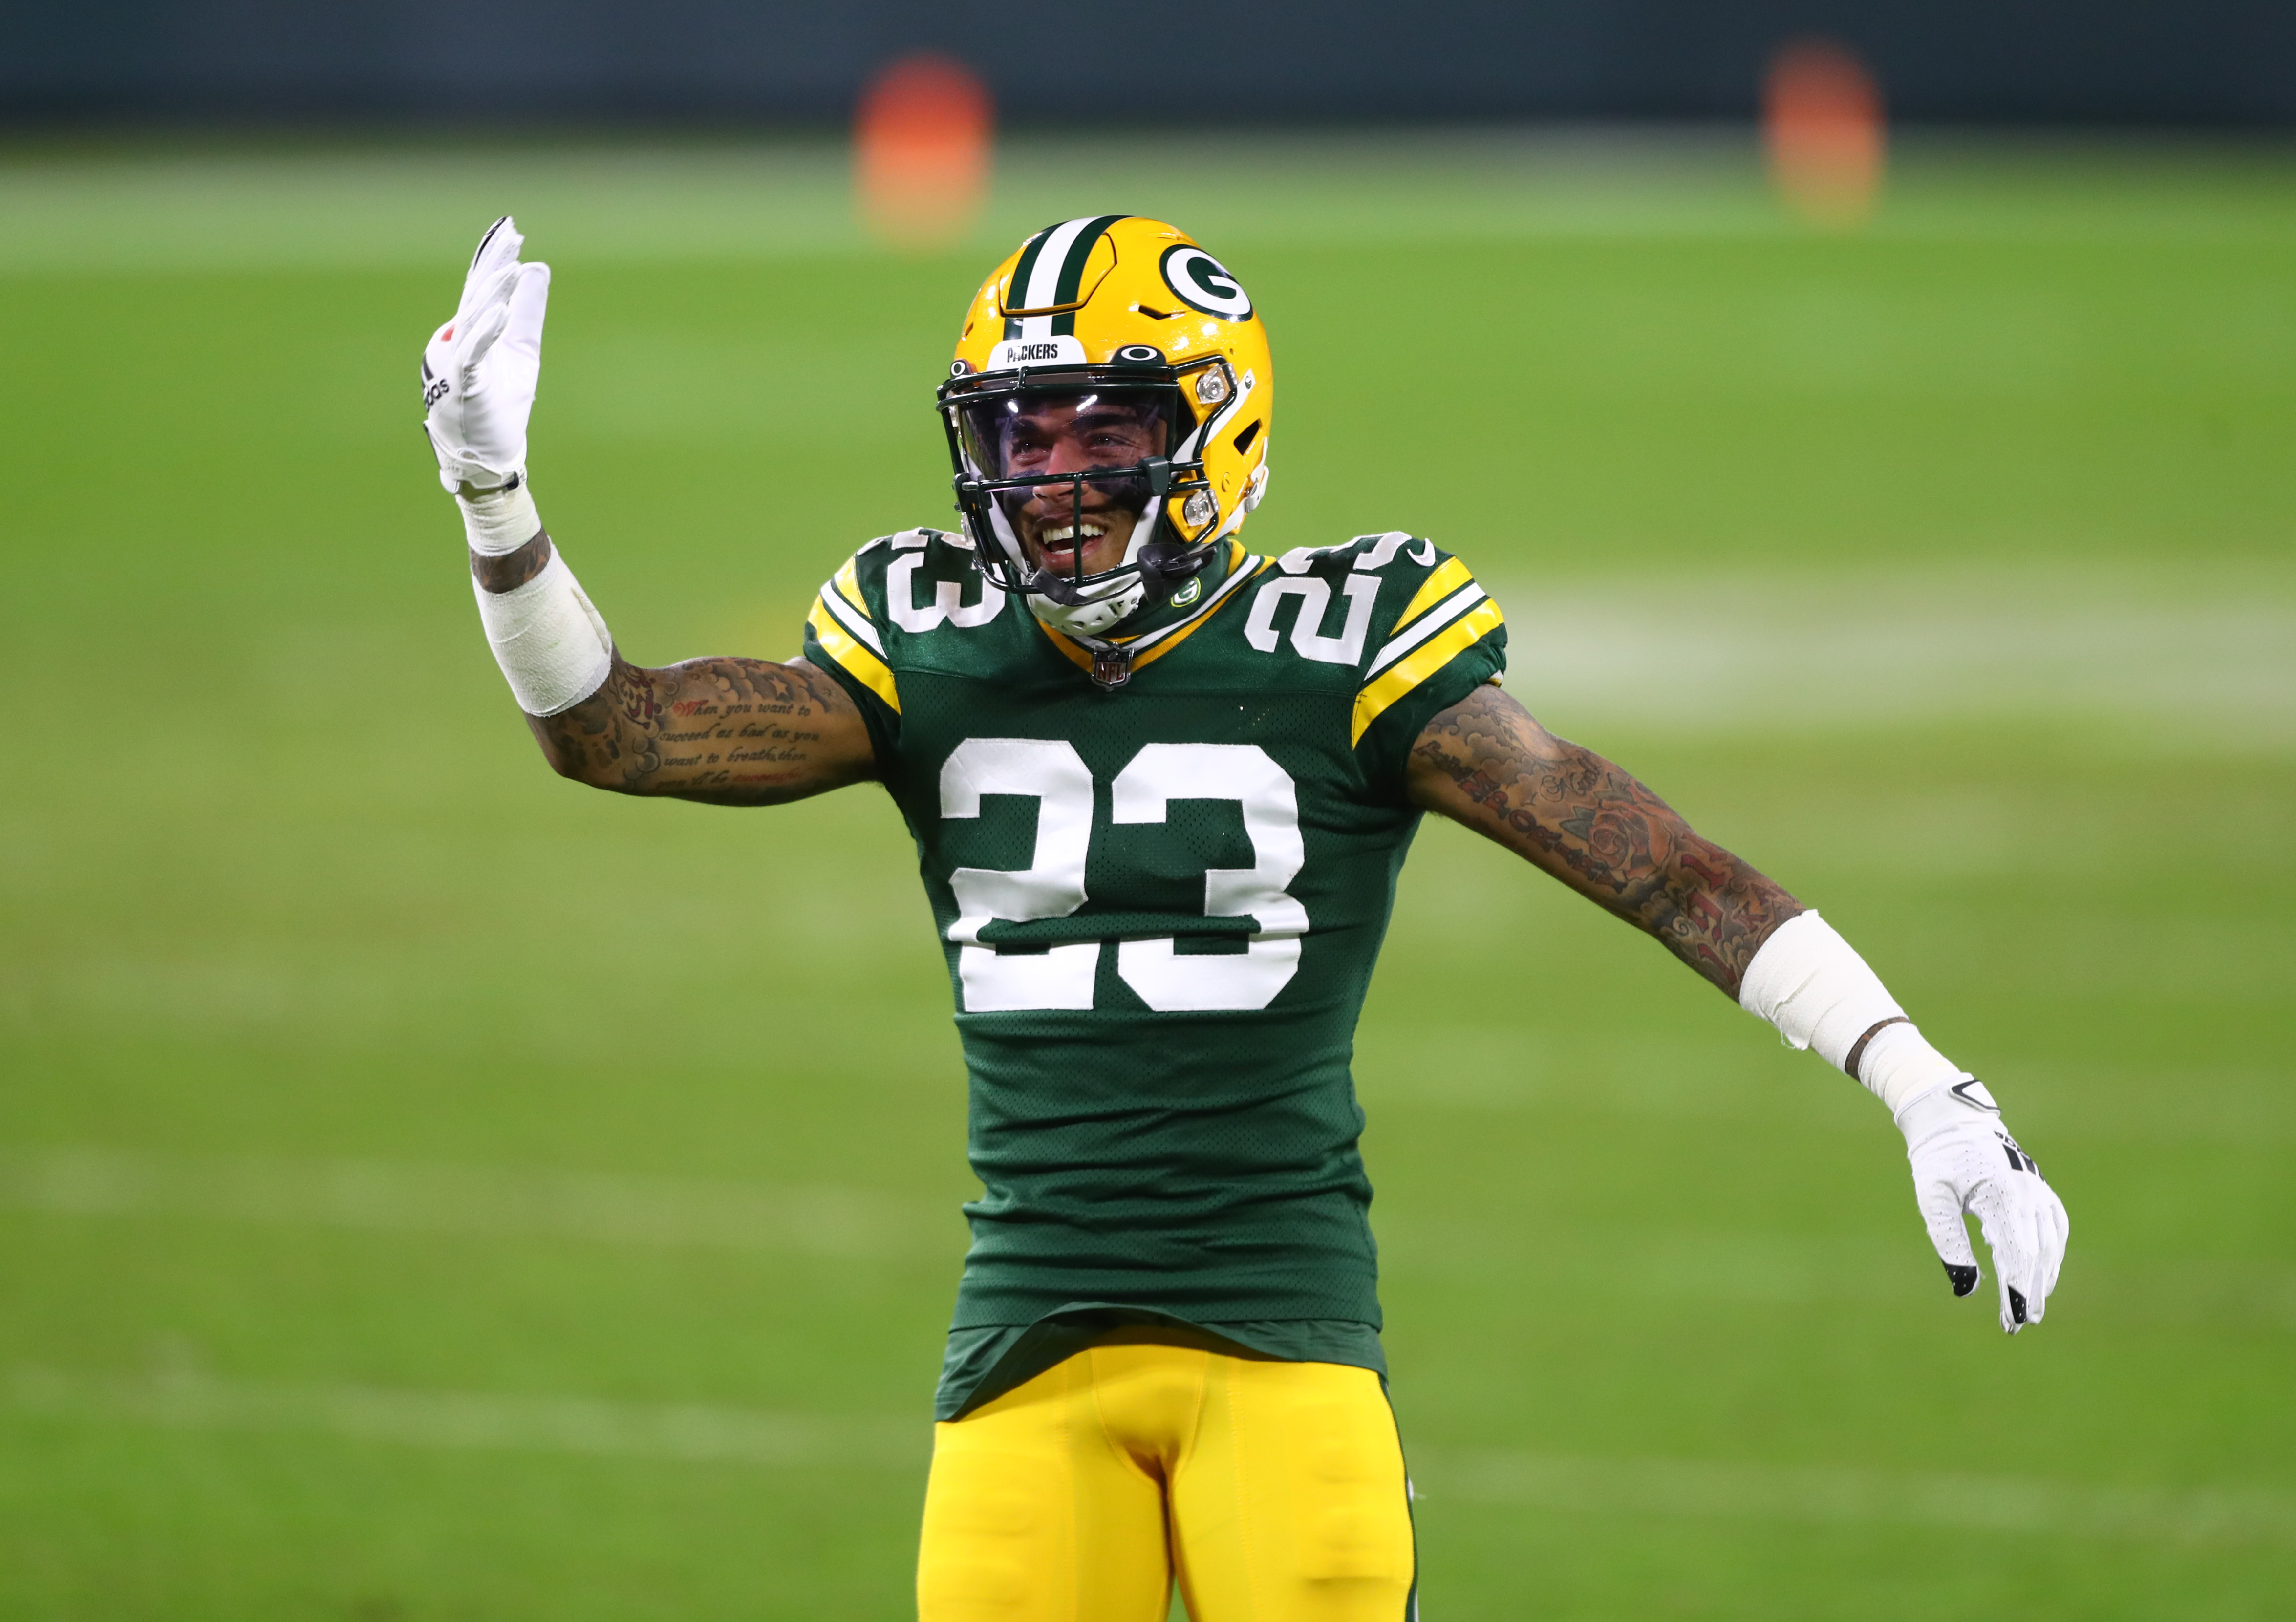 Green Bay Packers cornerback Jaire Alexander learning from Jerry Gray